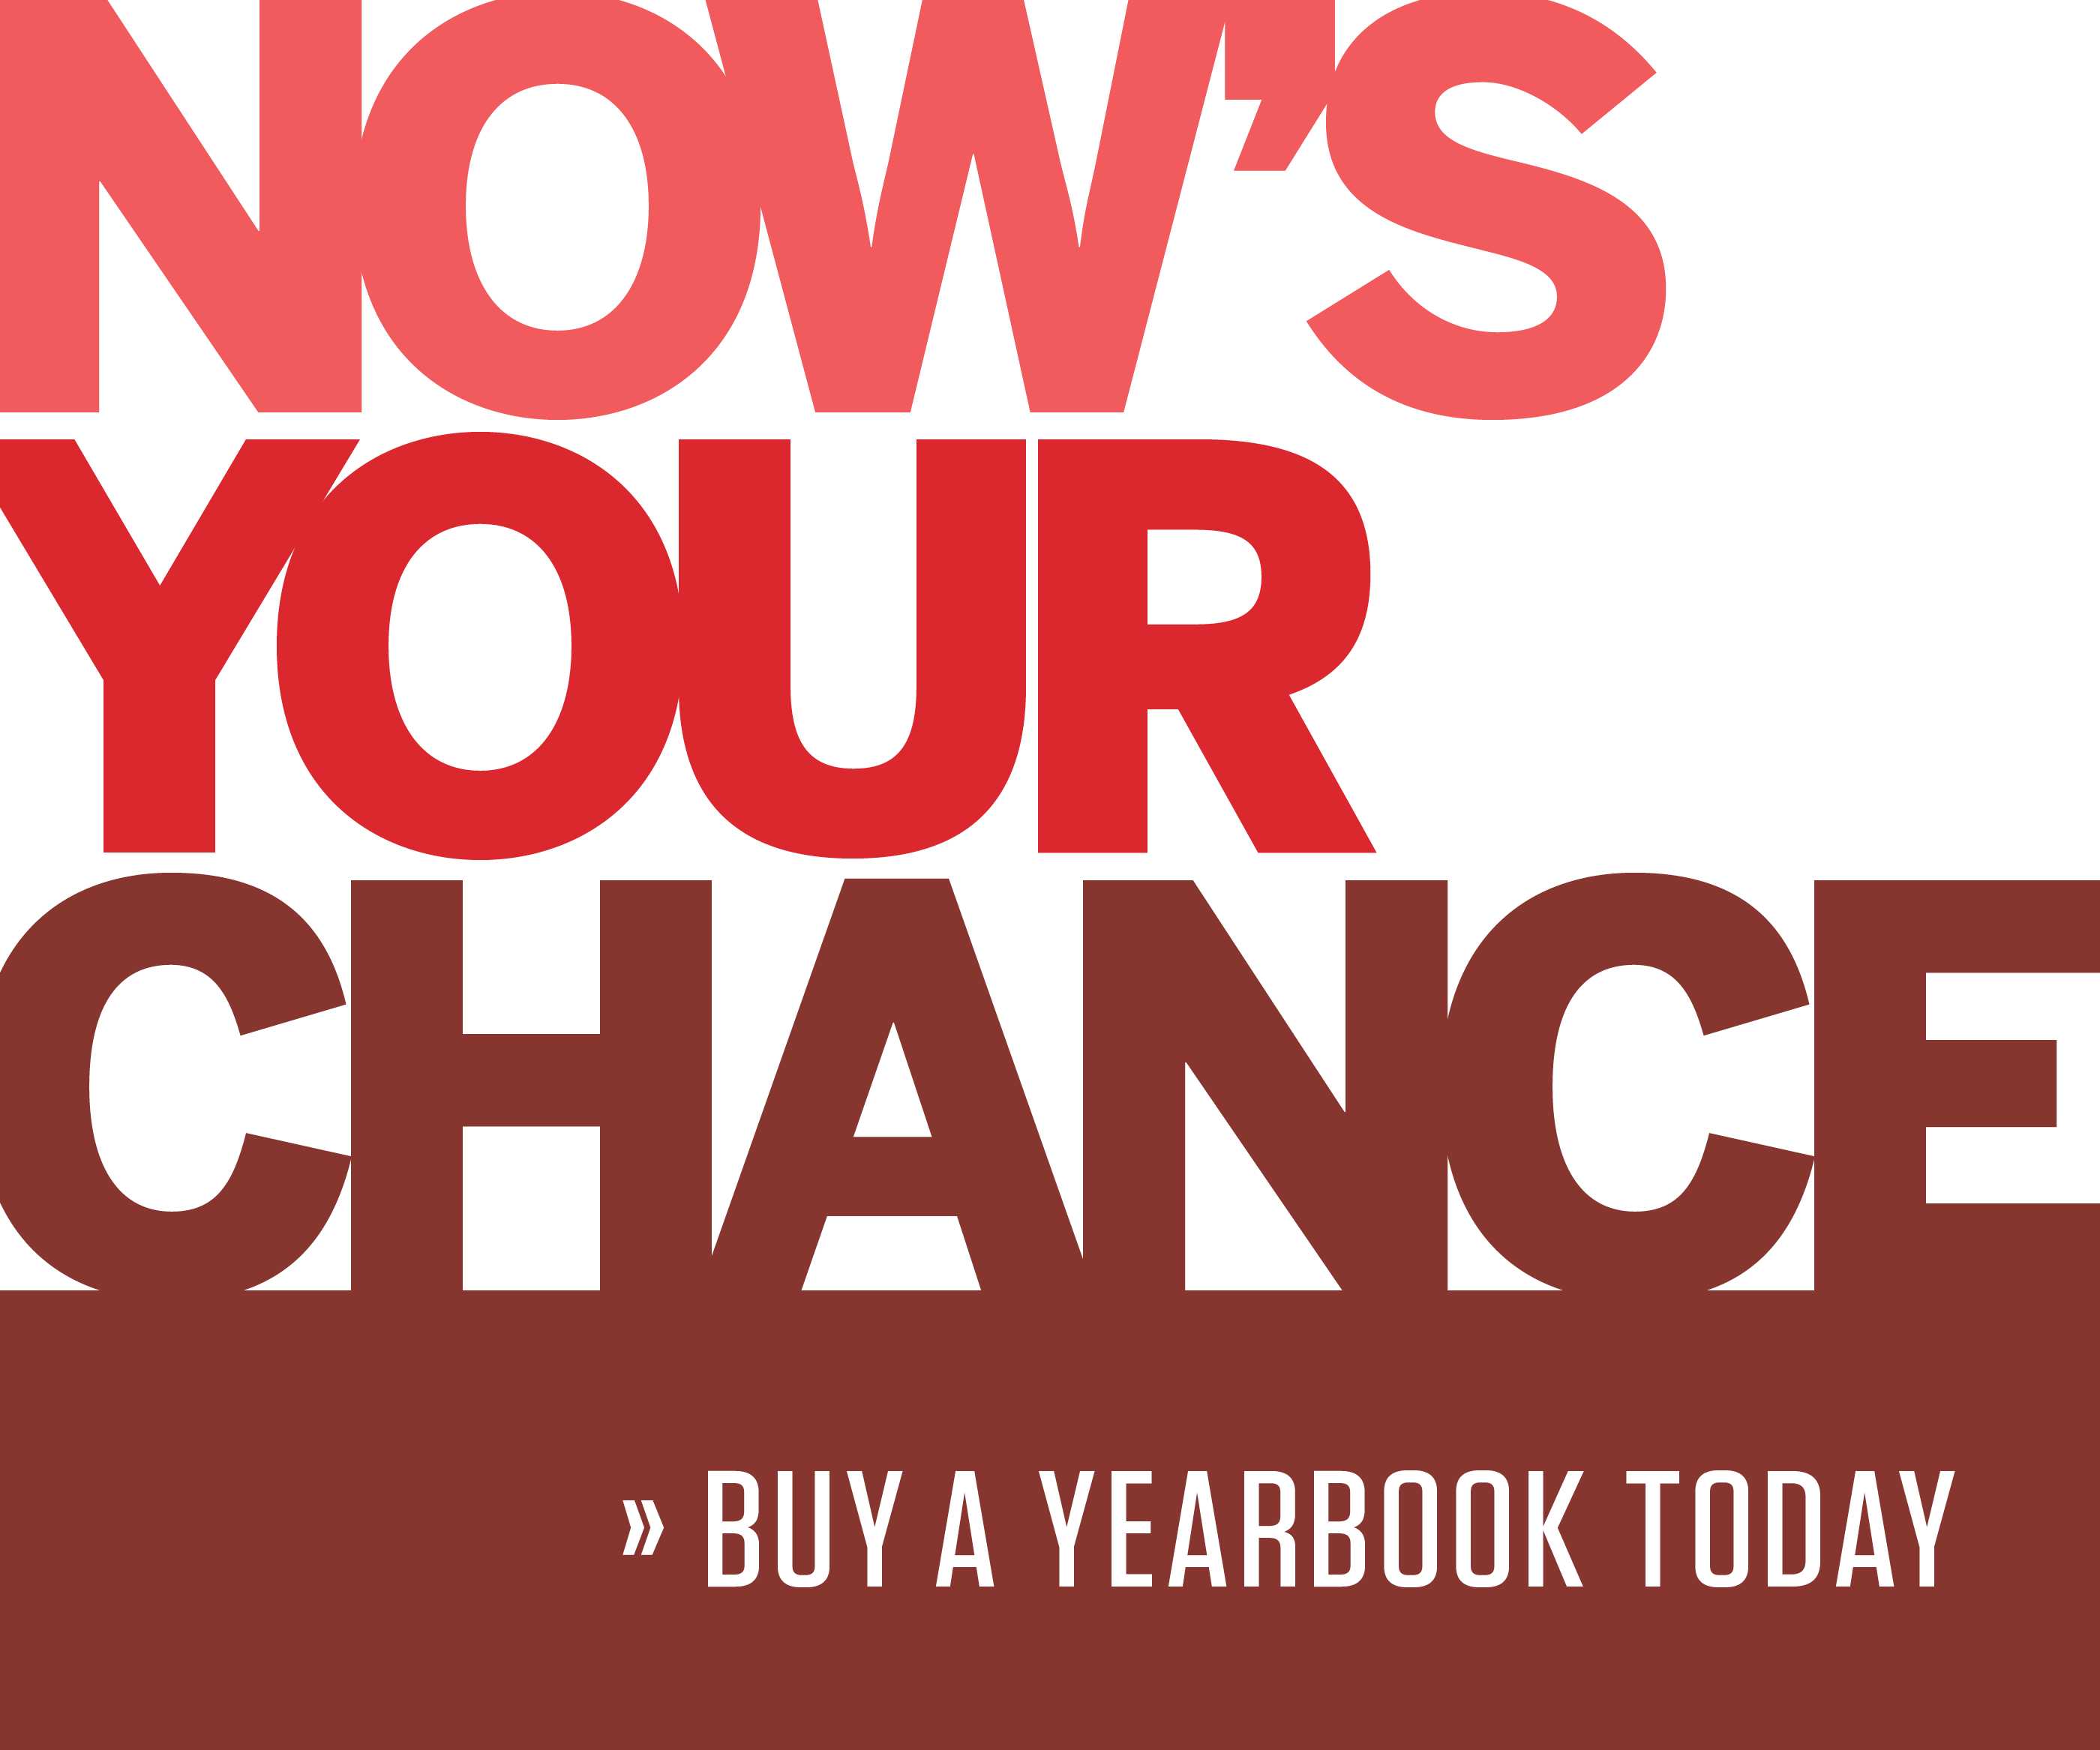 Small graphic with red and brown font stating Now is the time to buy a yearbook